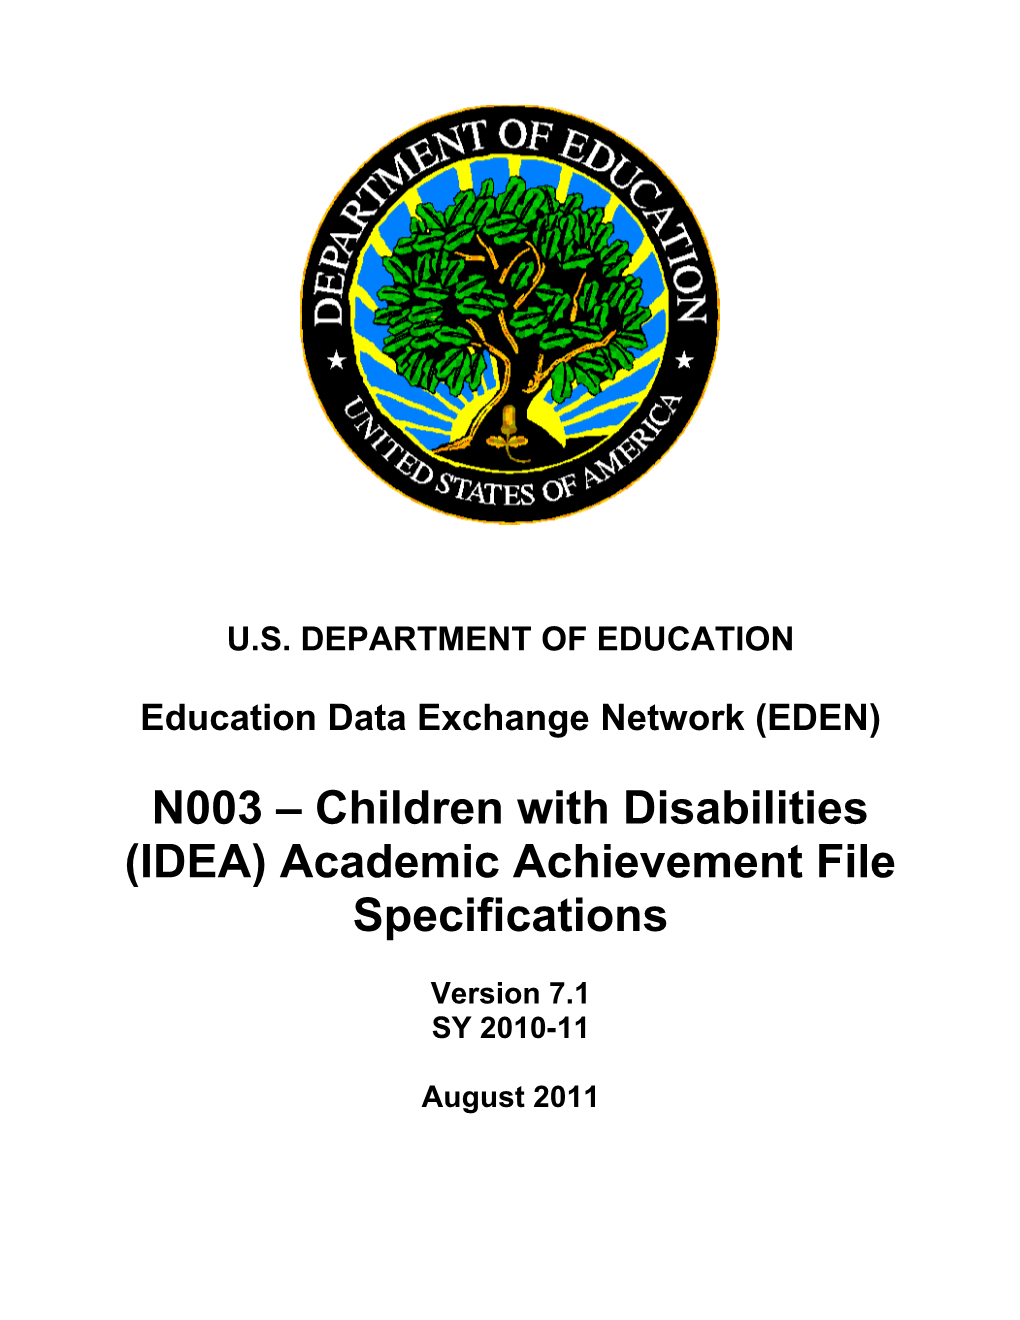 N003-7-1 Children with Disabilities (IDEA) Academic Achievement File Specifications (MS Word)